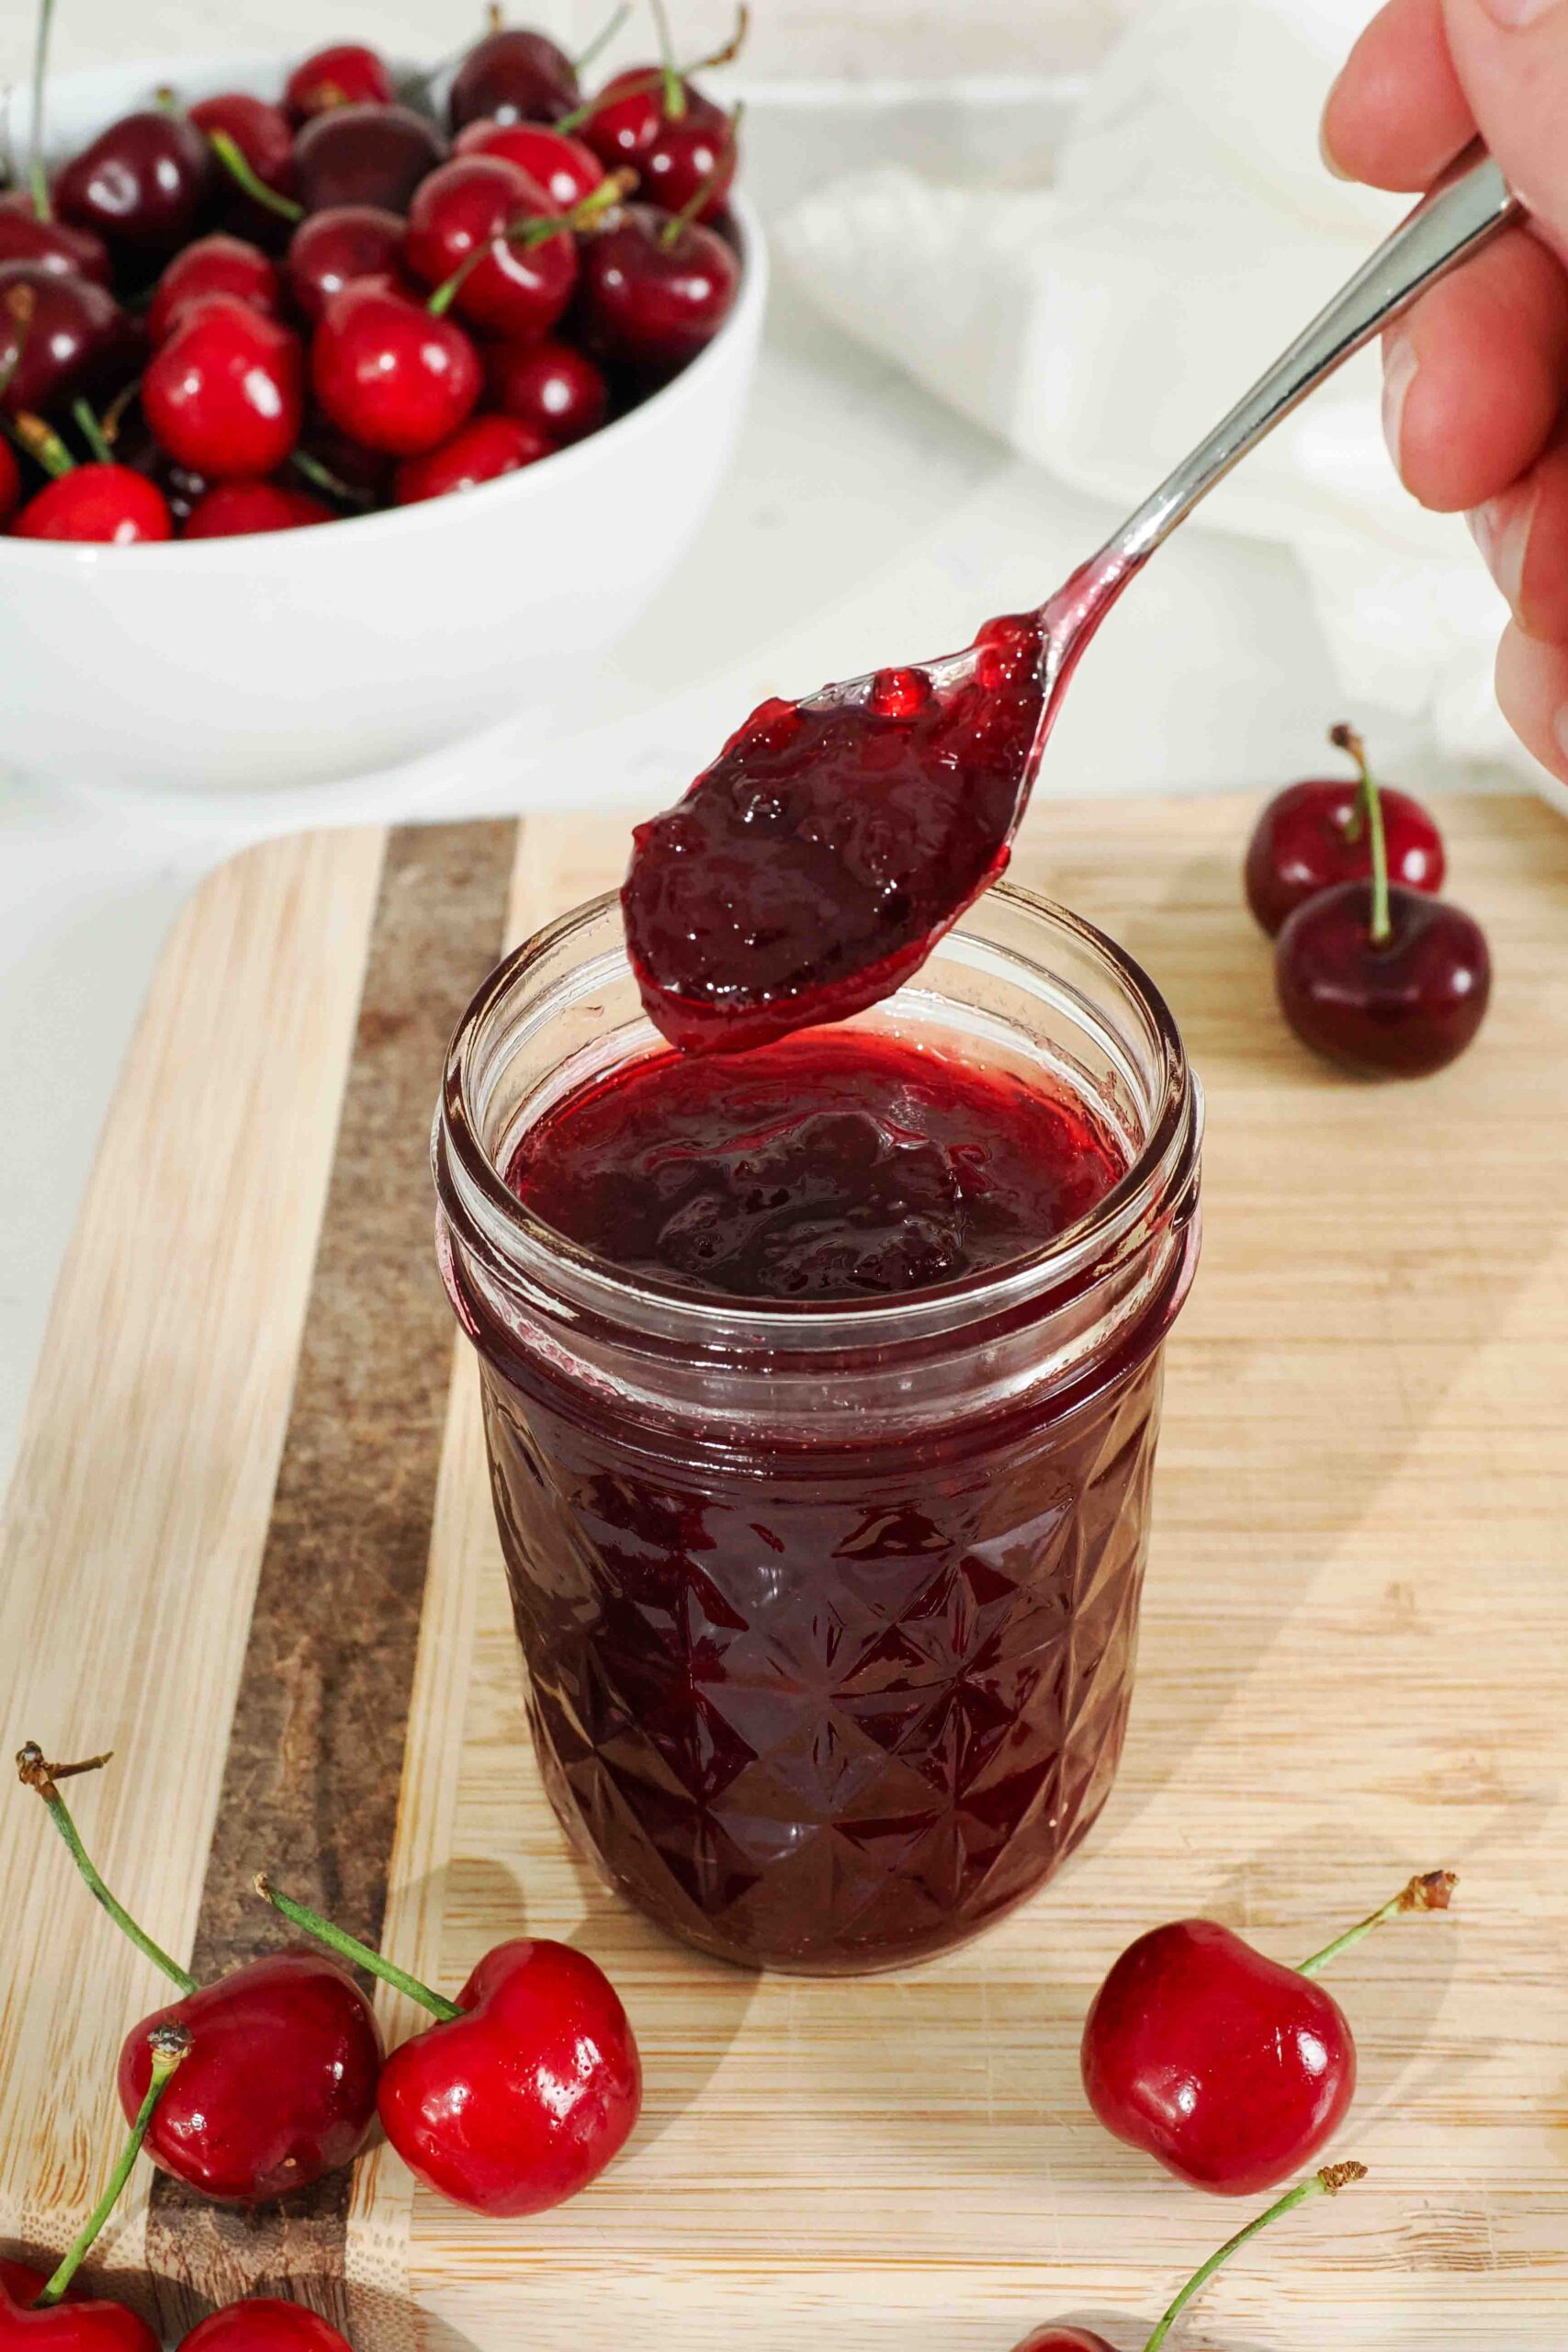 A hand holds up a spoonful of cherry jam from a glass jar.